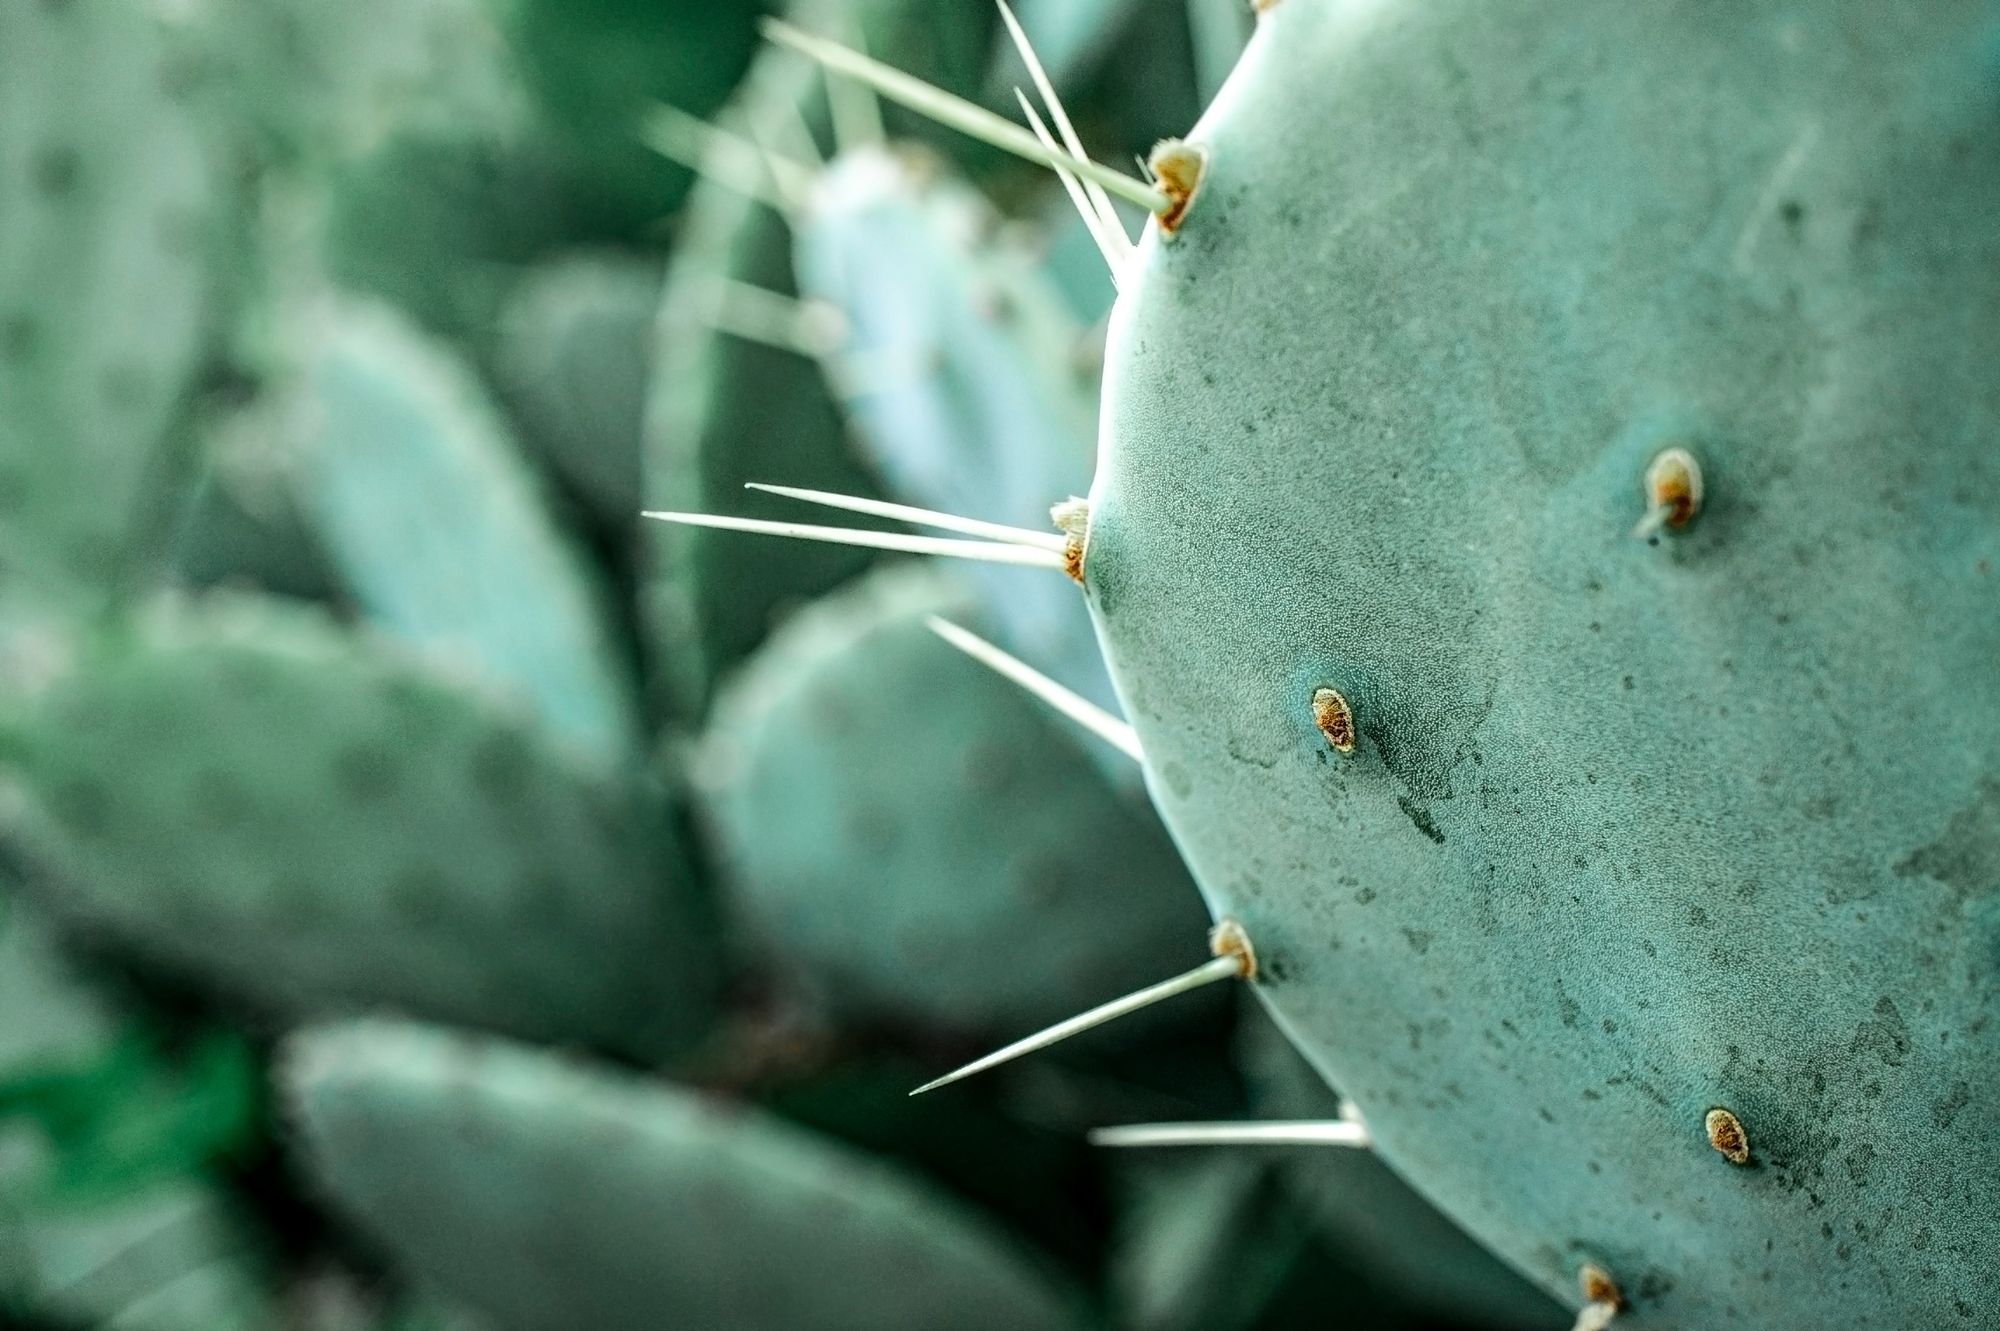 All You Need To Know About Vegan Cactus Leather